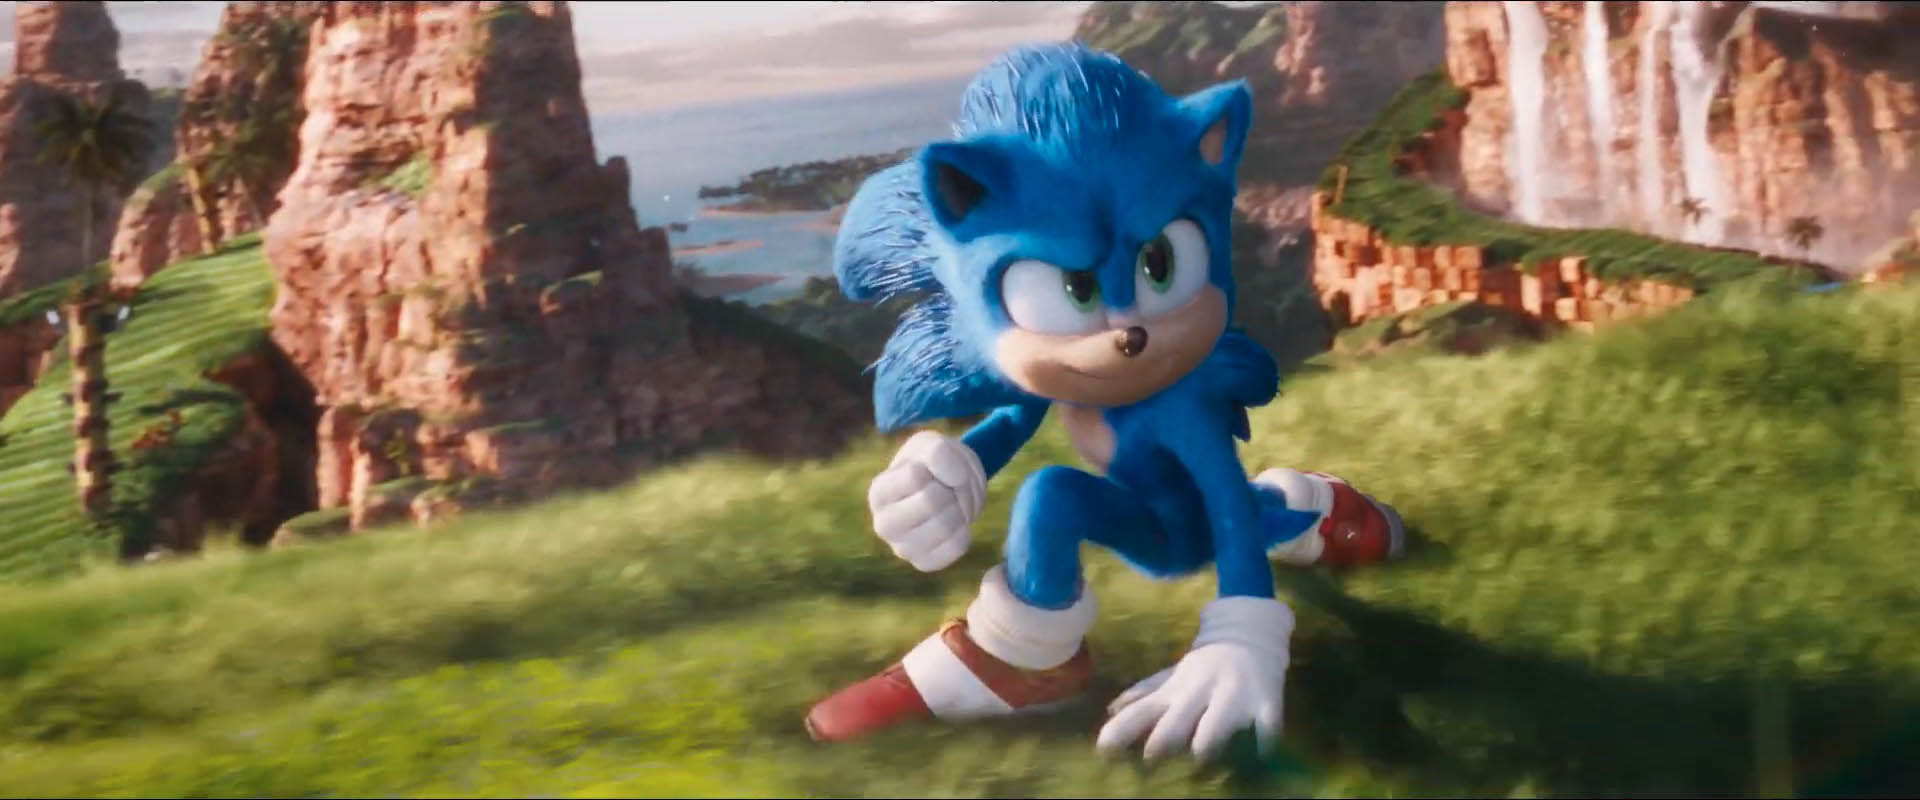 Sonic the Hedgehog trailer - Things look so much better | The Nerdy1920 x 800